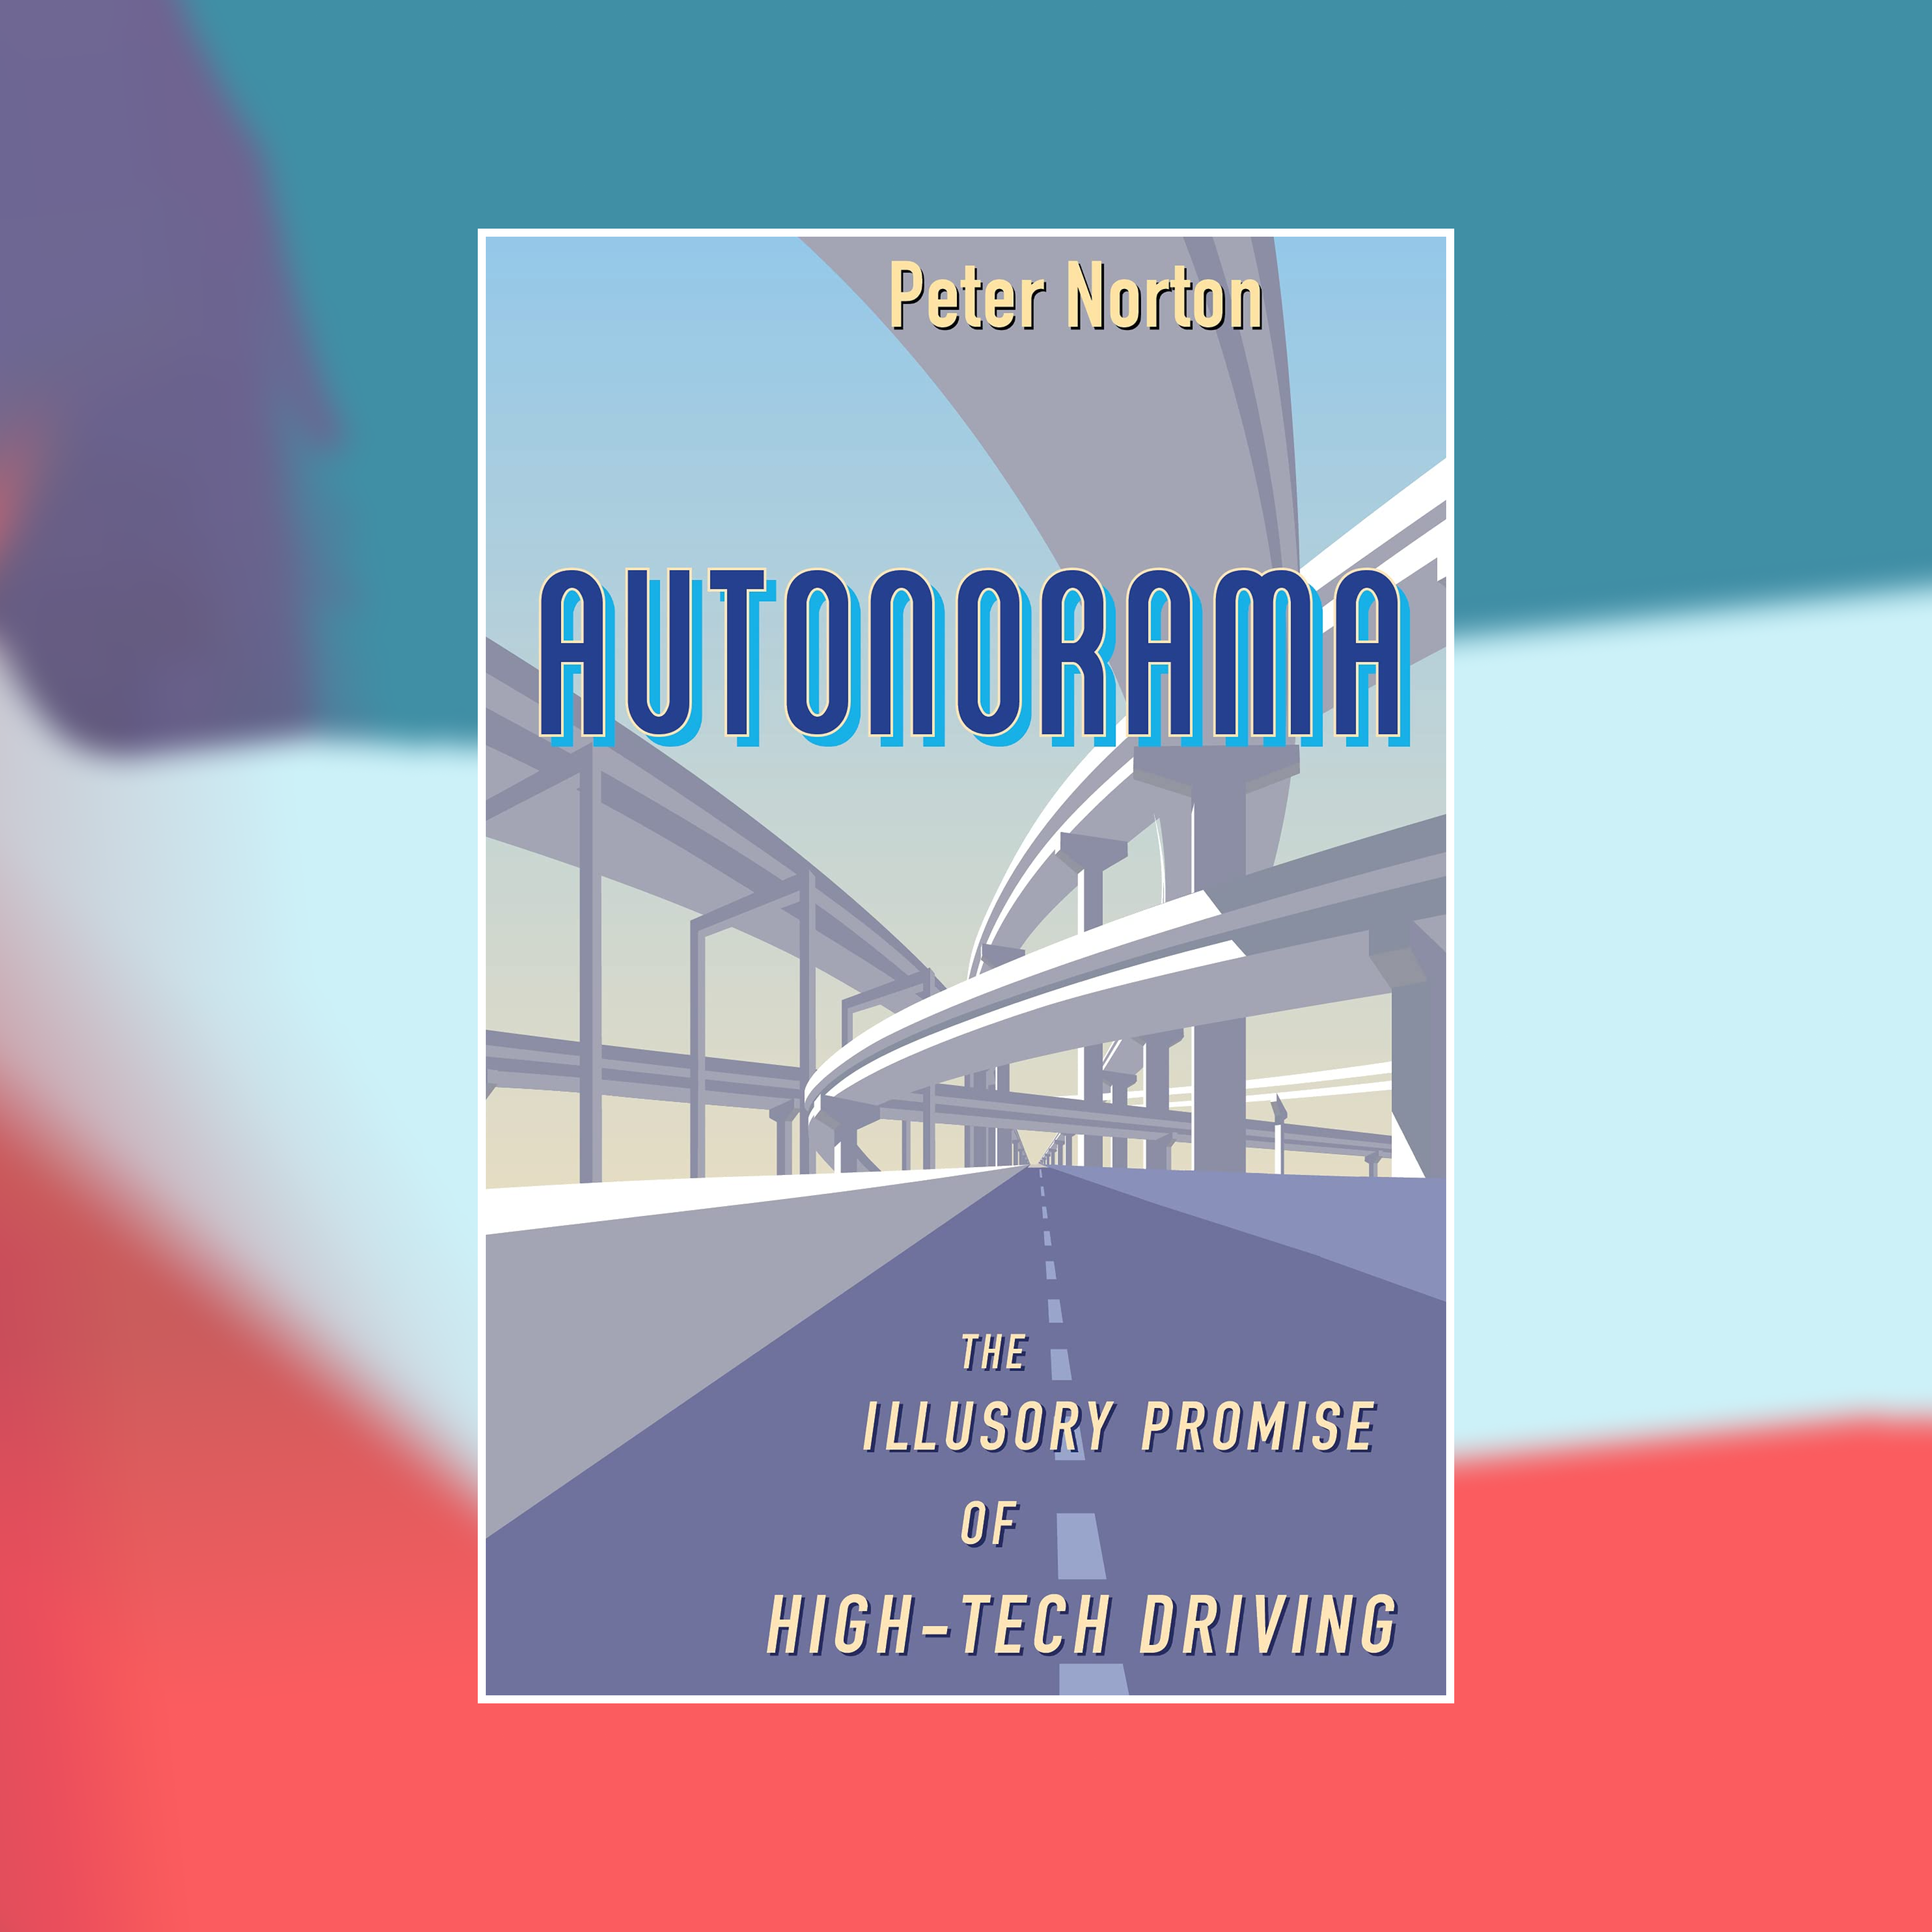 Book cover of Autonorama against an abstract painted background